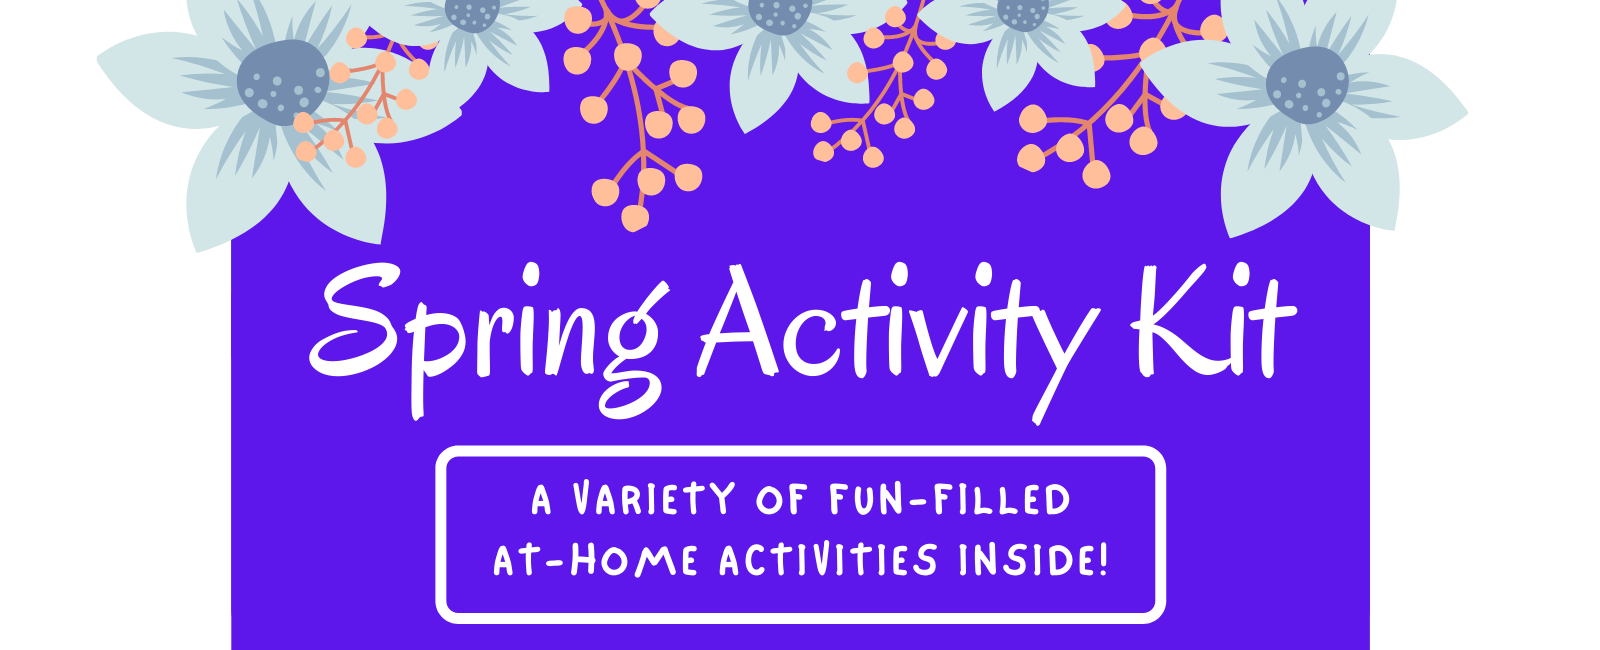 Spring Activity Kit Banner with Flowers